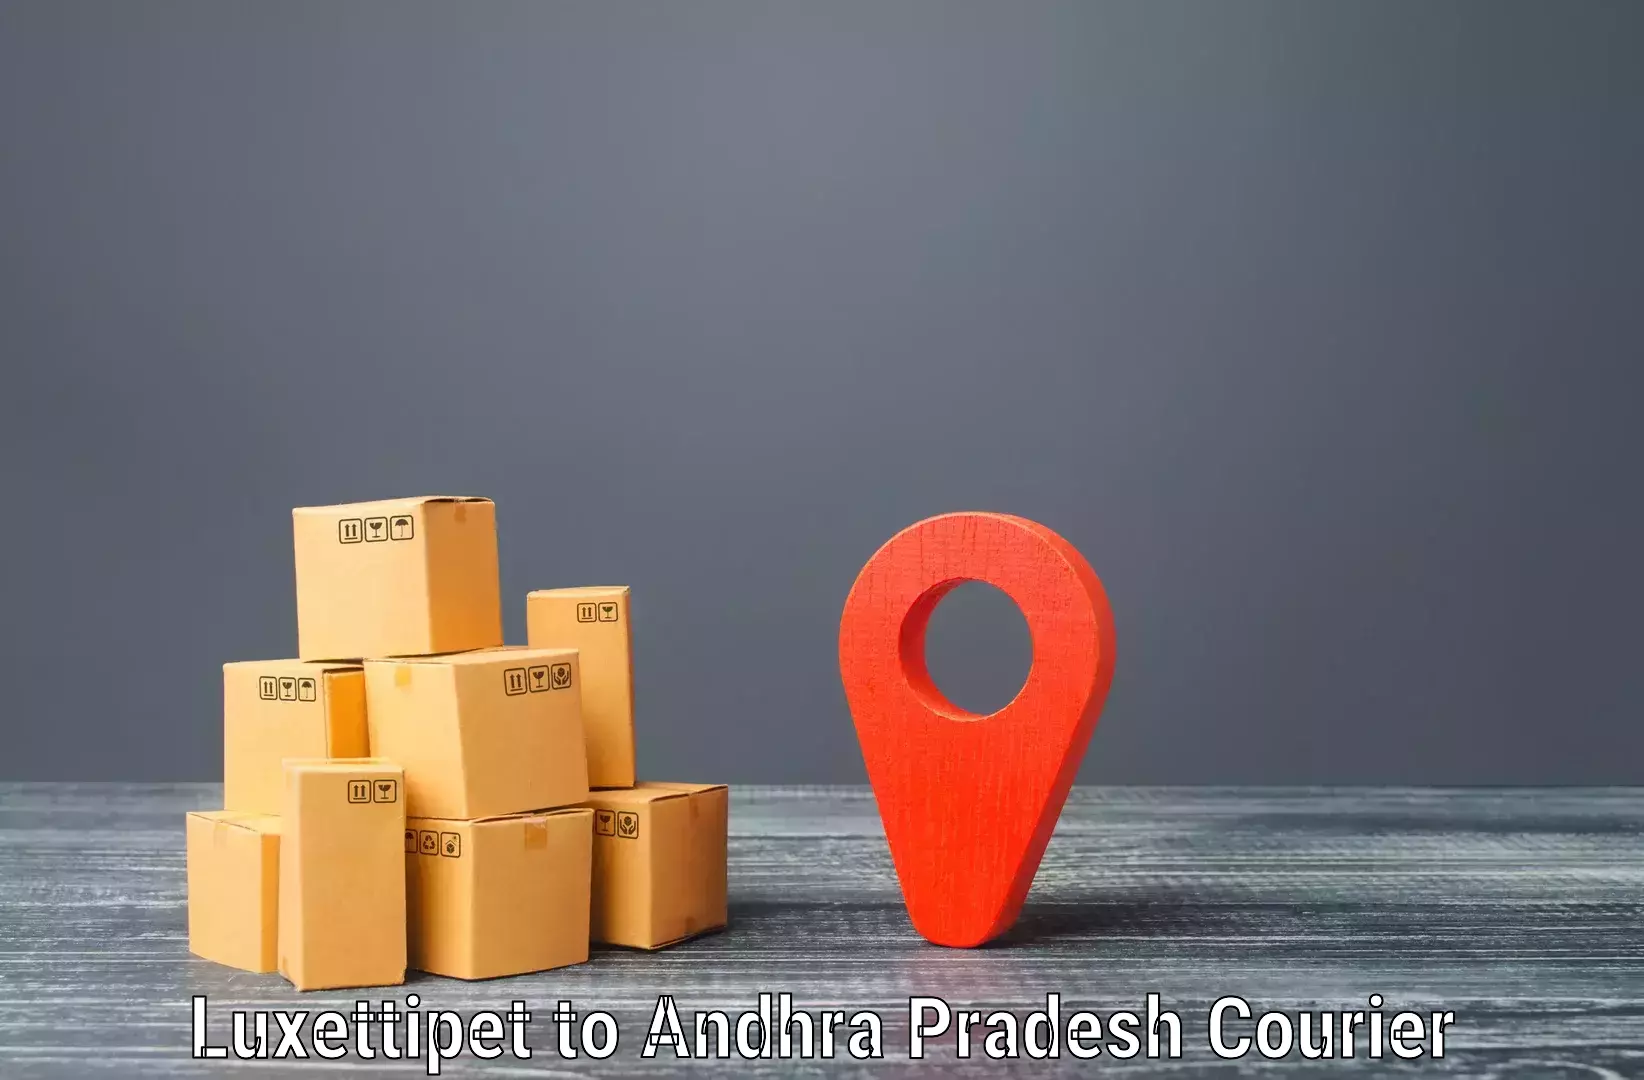 Advanced shipping services Luxettipet to Ponnur